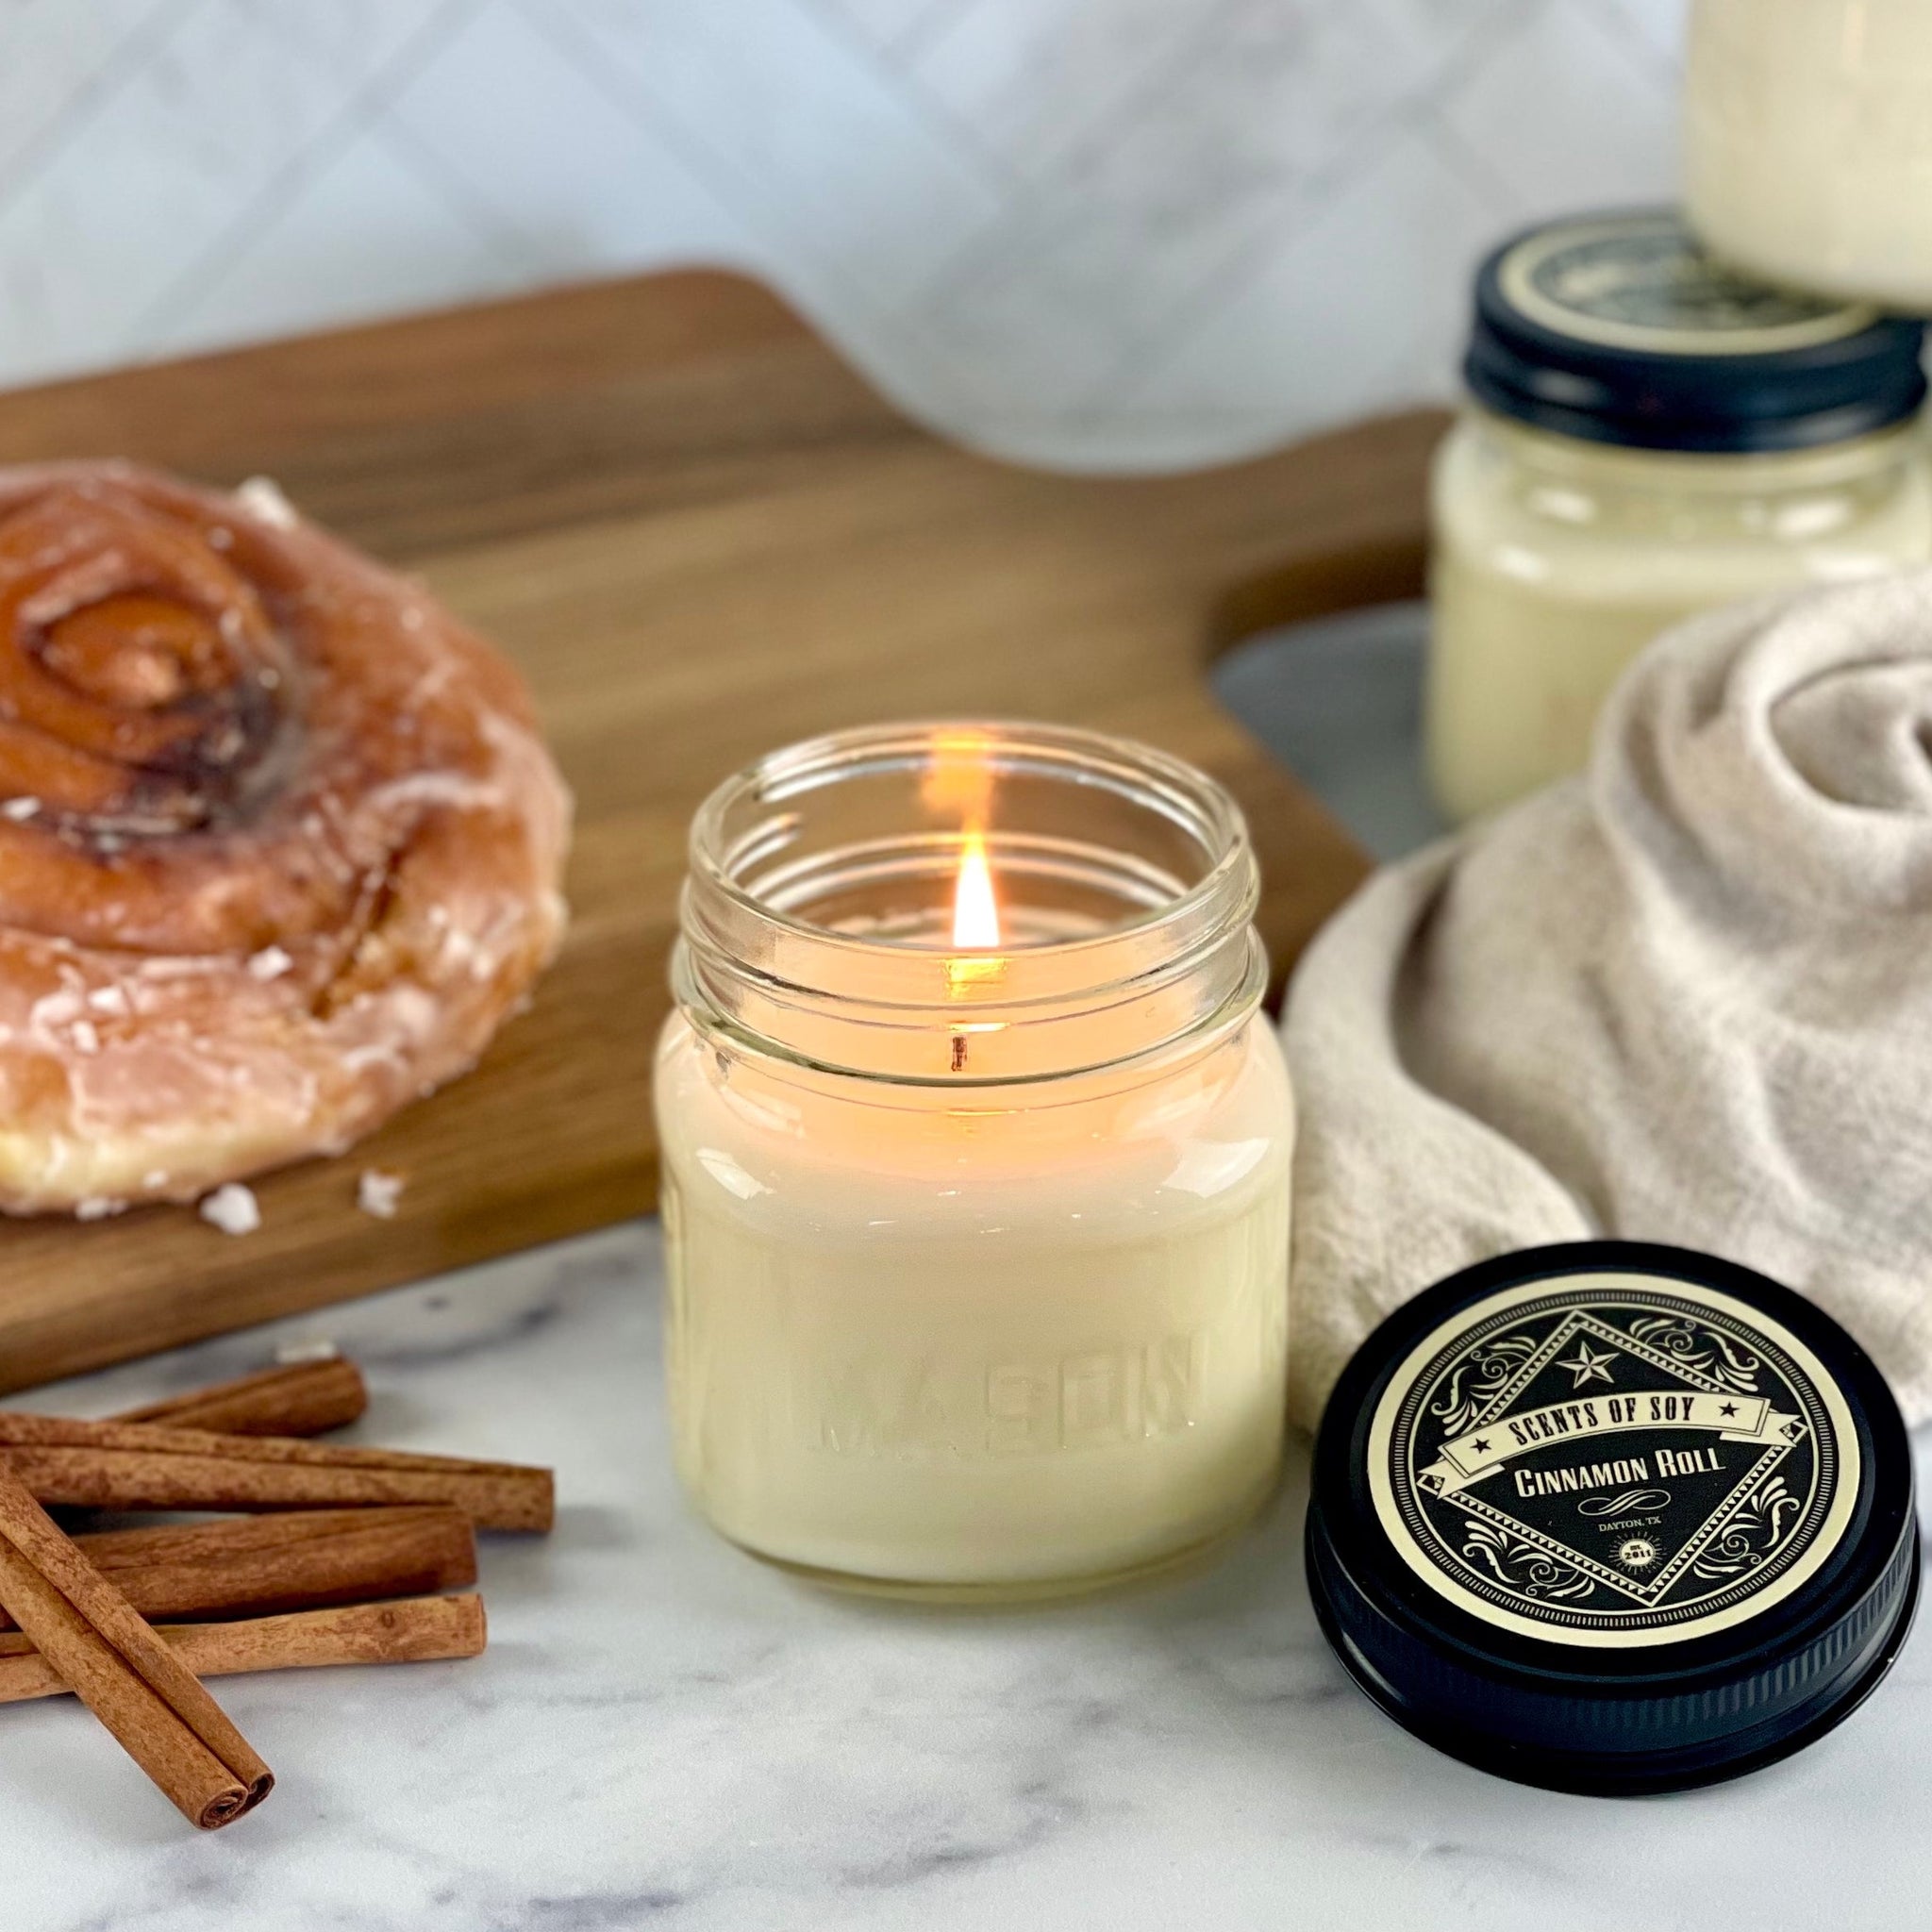 Scents Of Soy Candle Co.